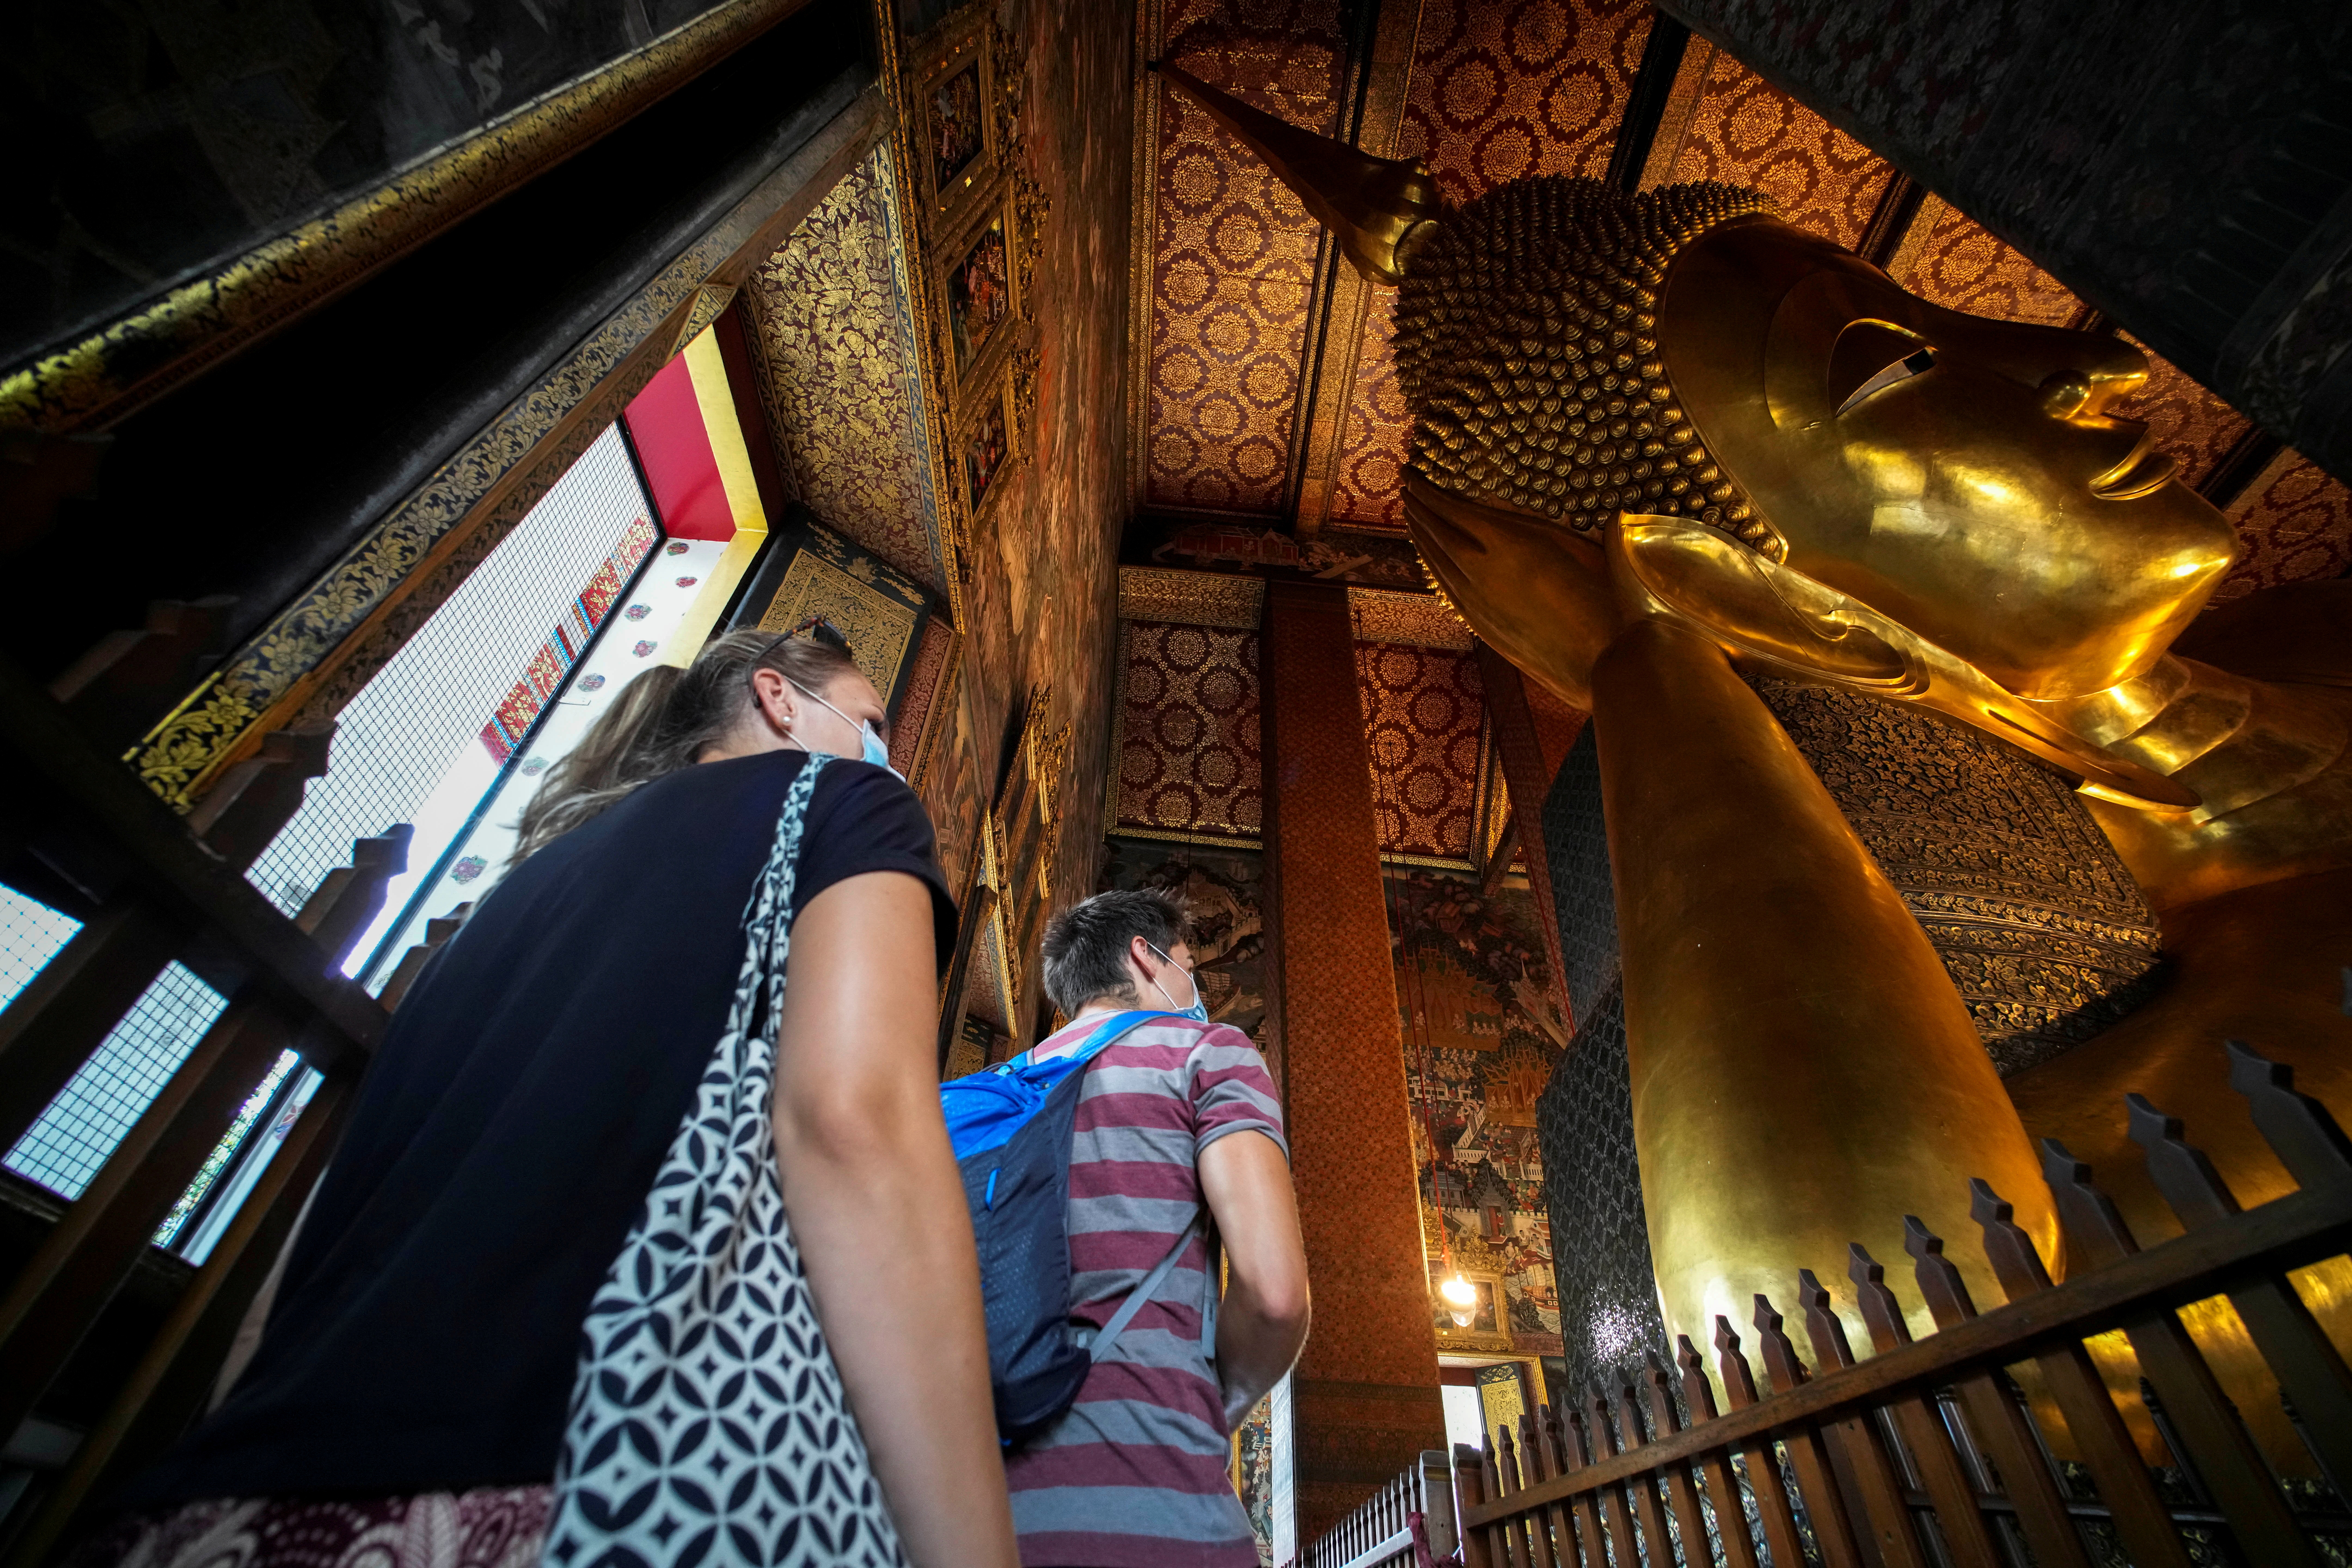 Foreign tourists are seen next to the Reclining Buddha at Wat Pho, a day after country's reopening campaign which is a part of the government's plan to jump start the pandemic-hit tourism sector in Bangkok